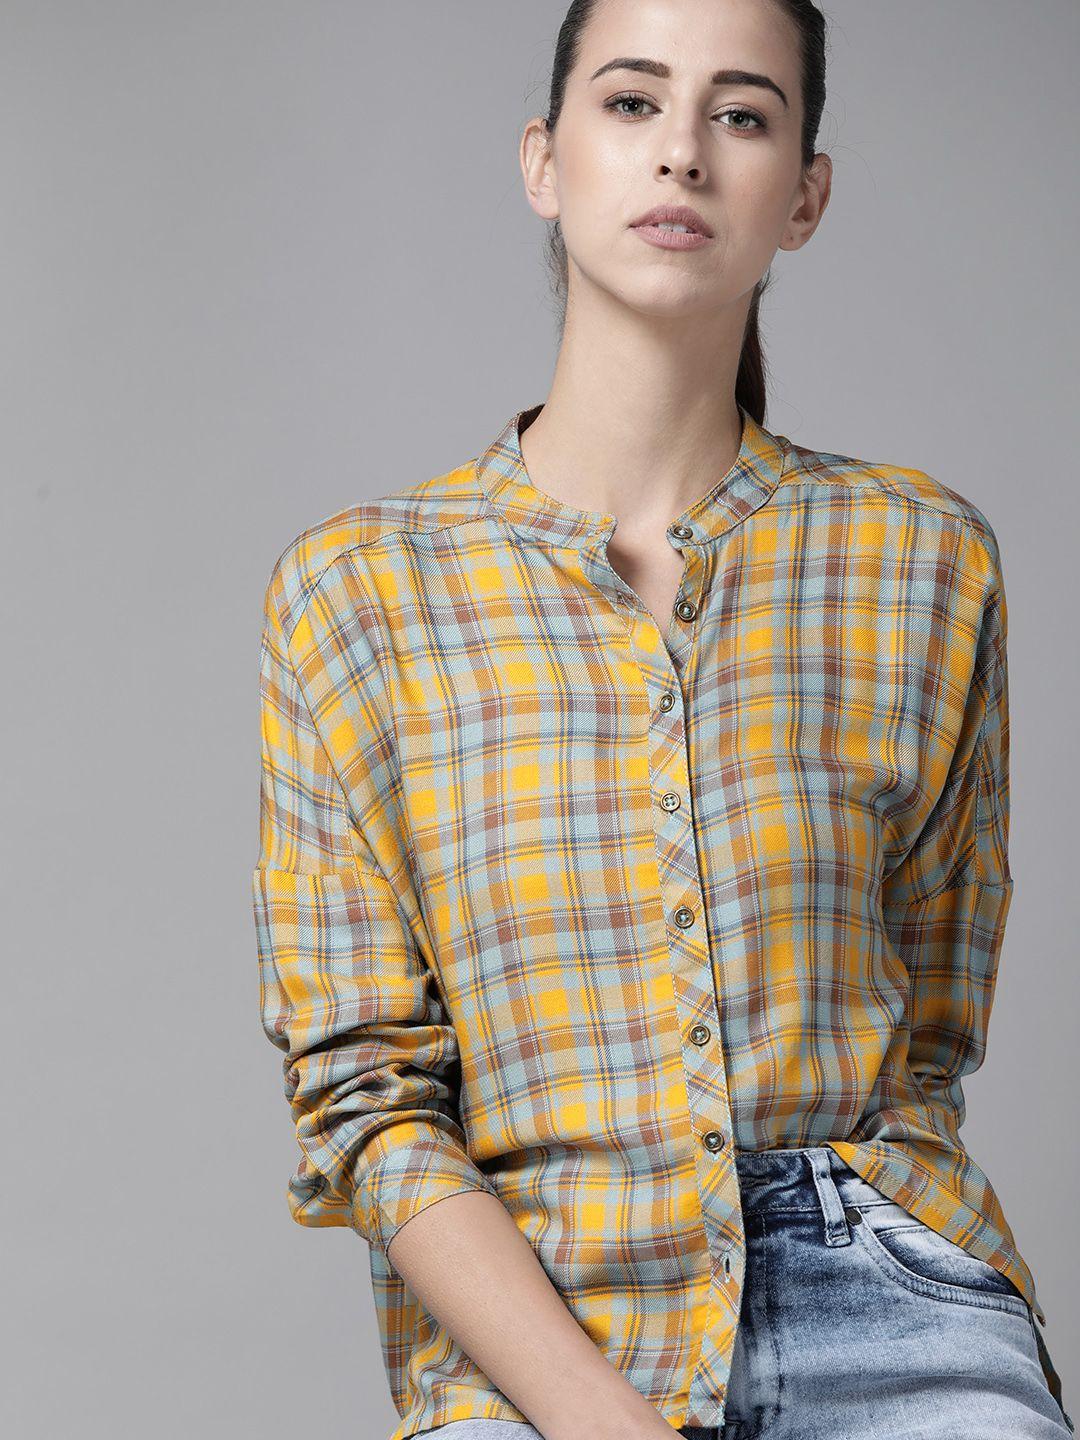 the roadster lifestyle co women mustard yellow & blue tartan checked casual shirt